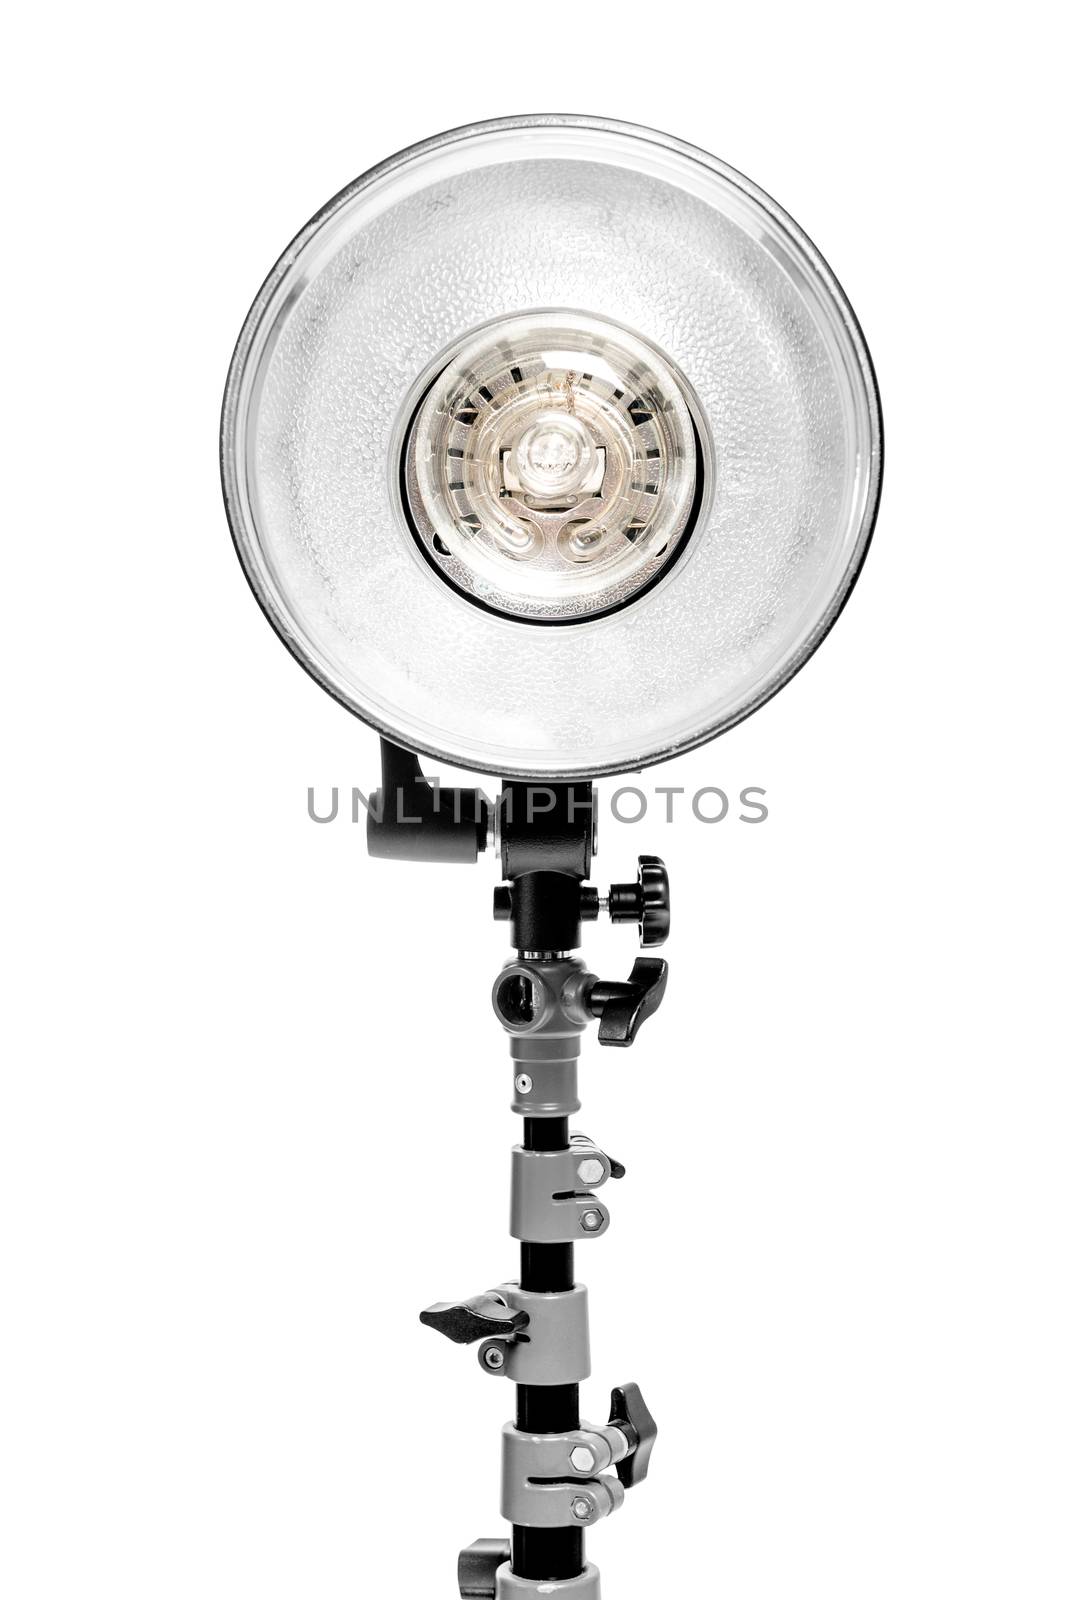 powerful photo flash lamp on rack on white background in studio by kosmsos111